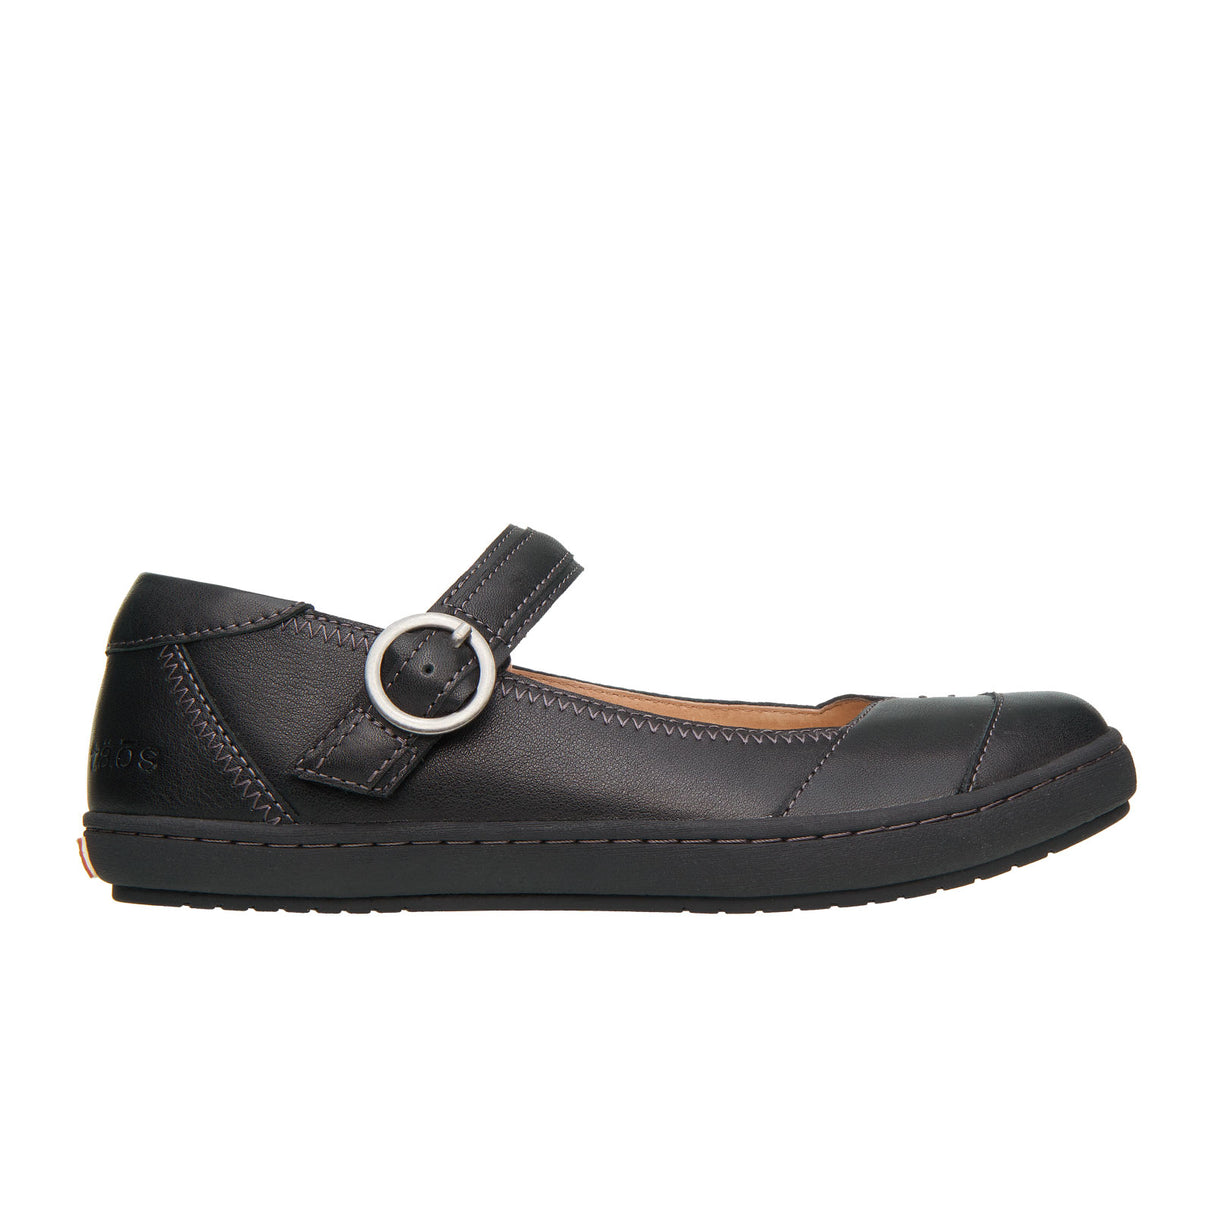 Taos Forward Mary Jane (Women) - Black on Black Dress-Casual - Mary Janes - The Heel Shoe Fitters